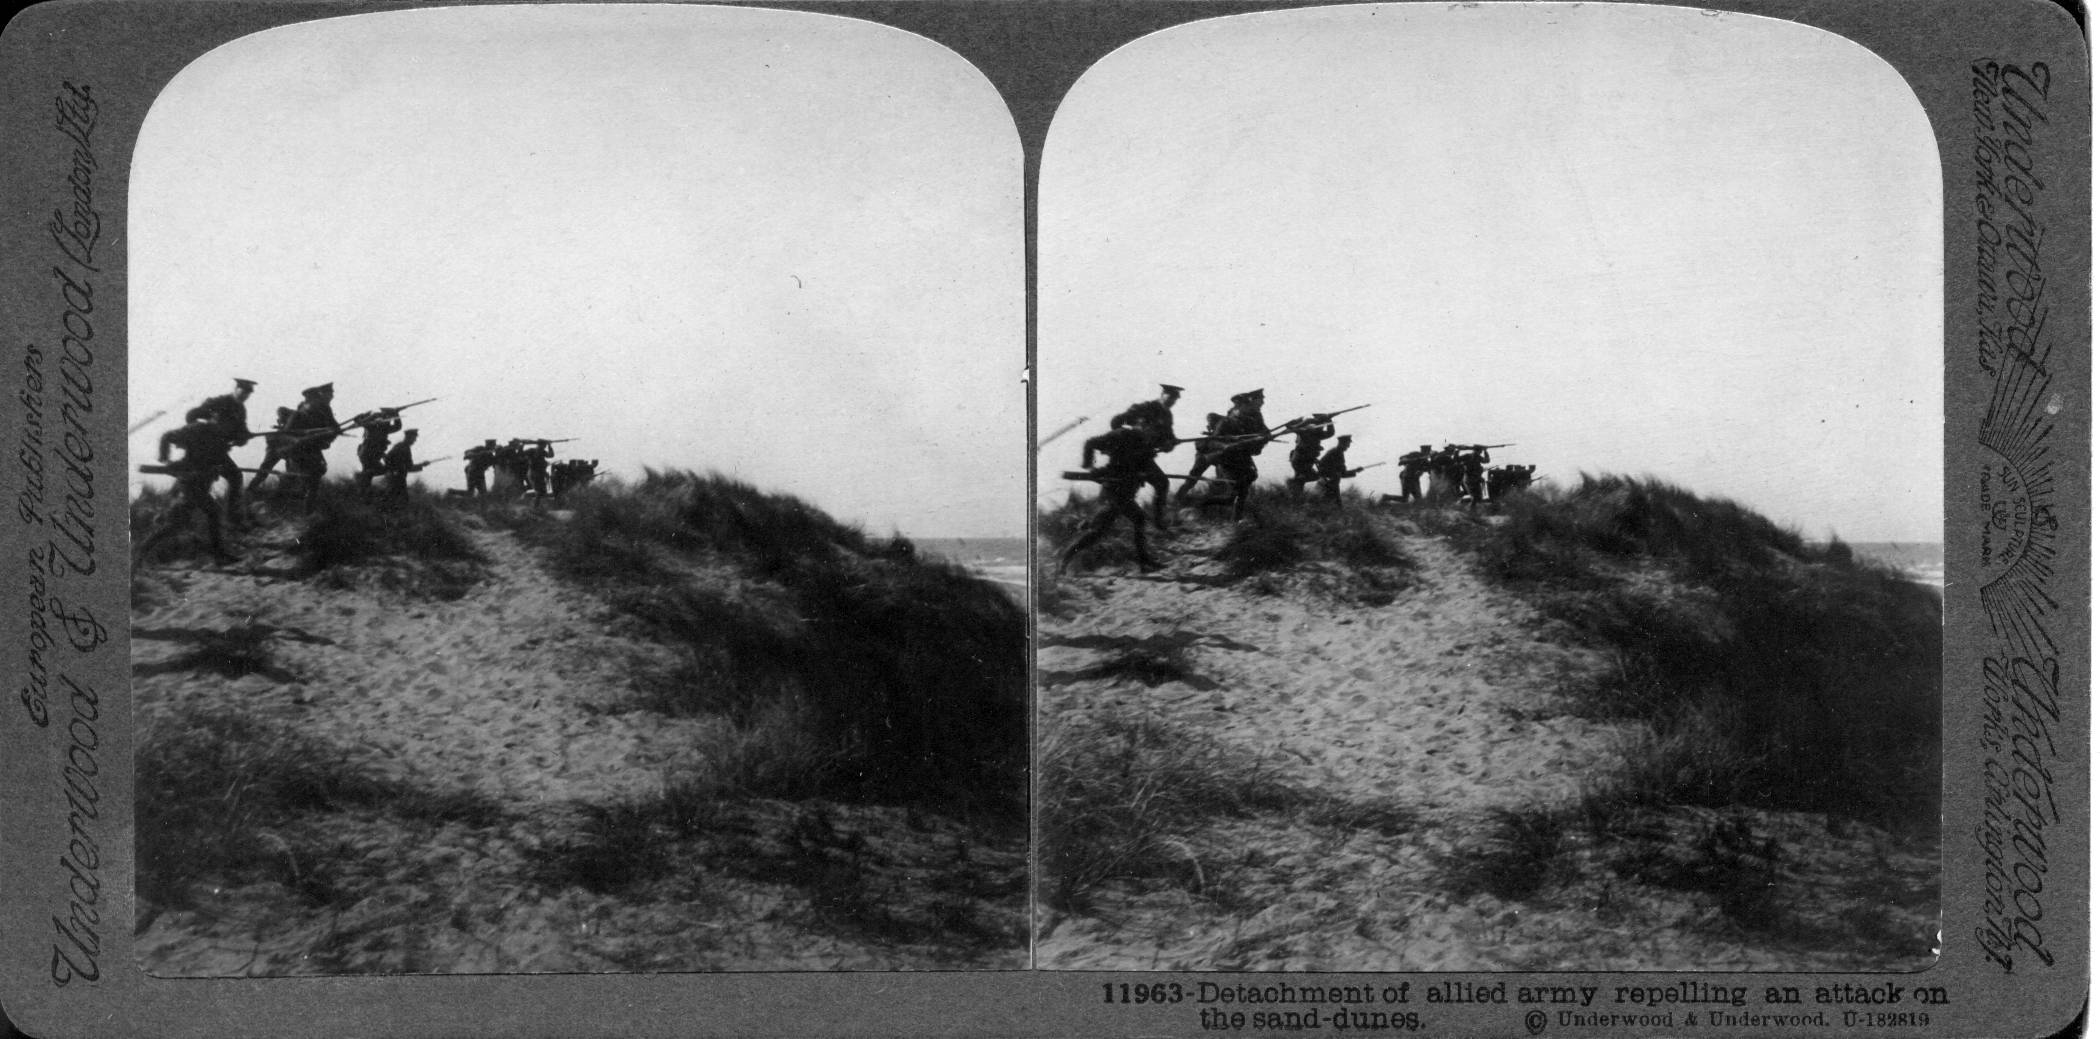 Detachment of allied army repelling an attack on the sand dunes